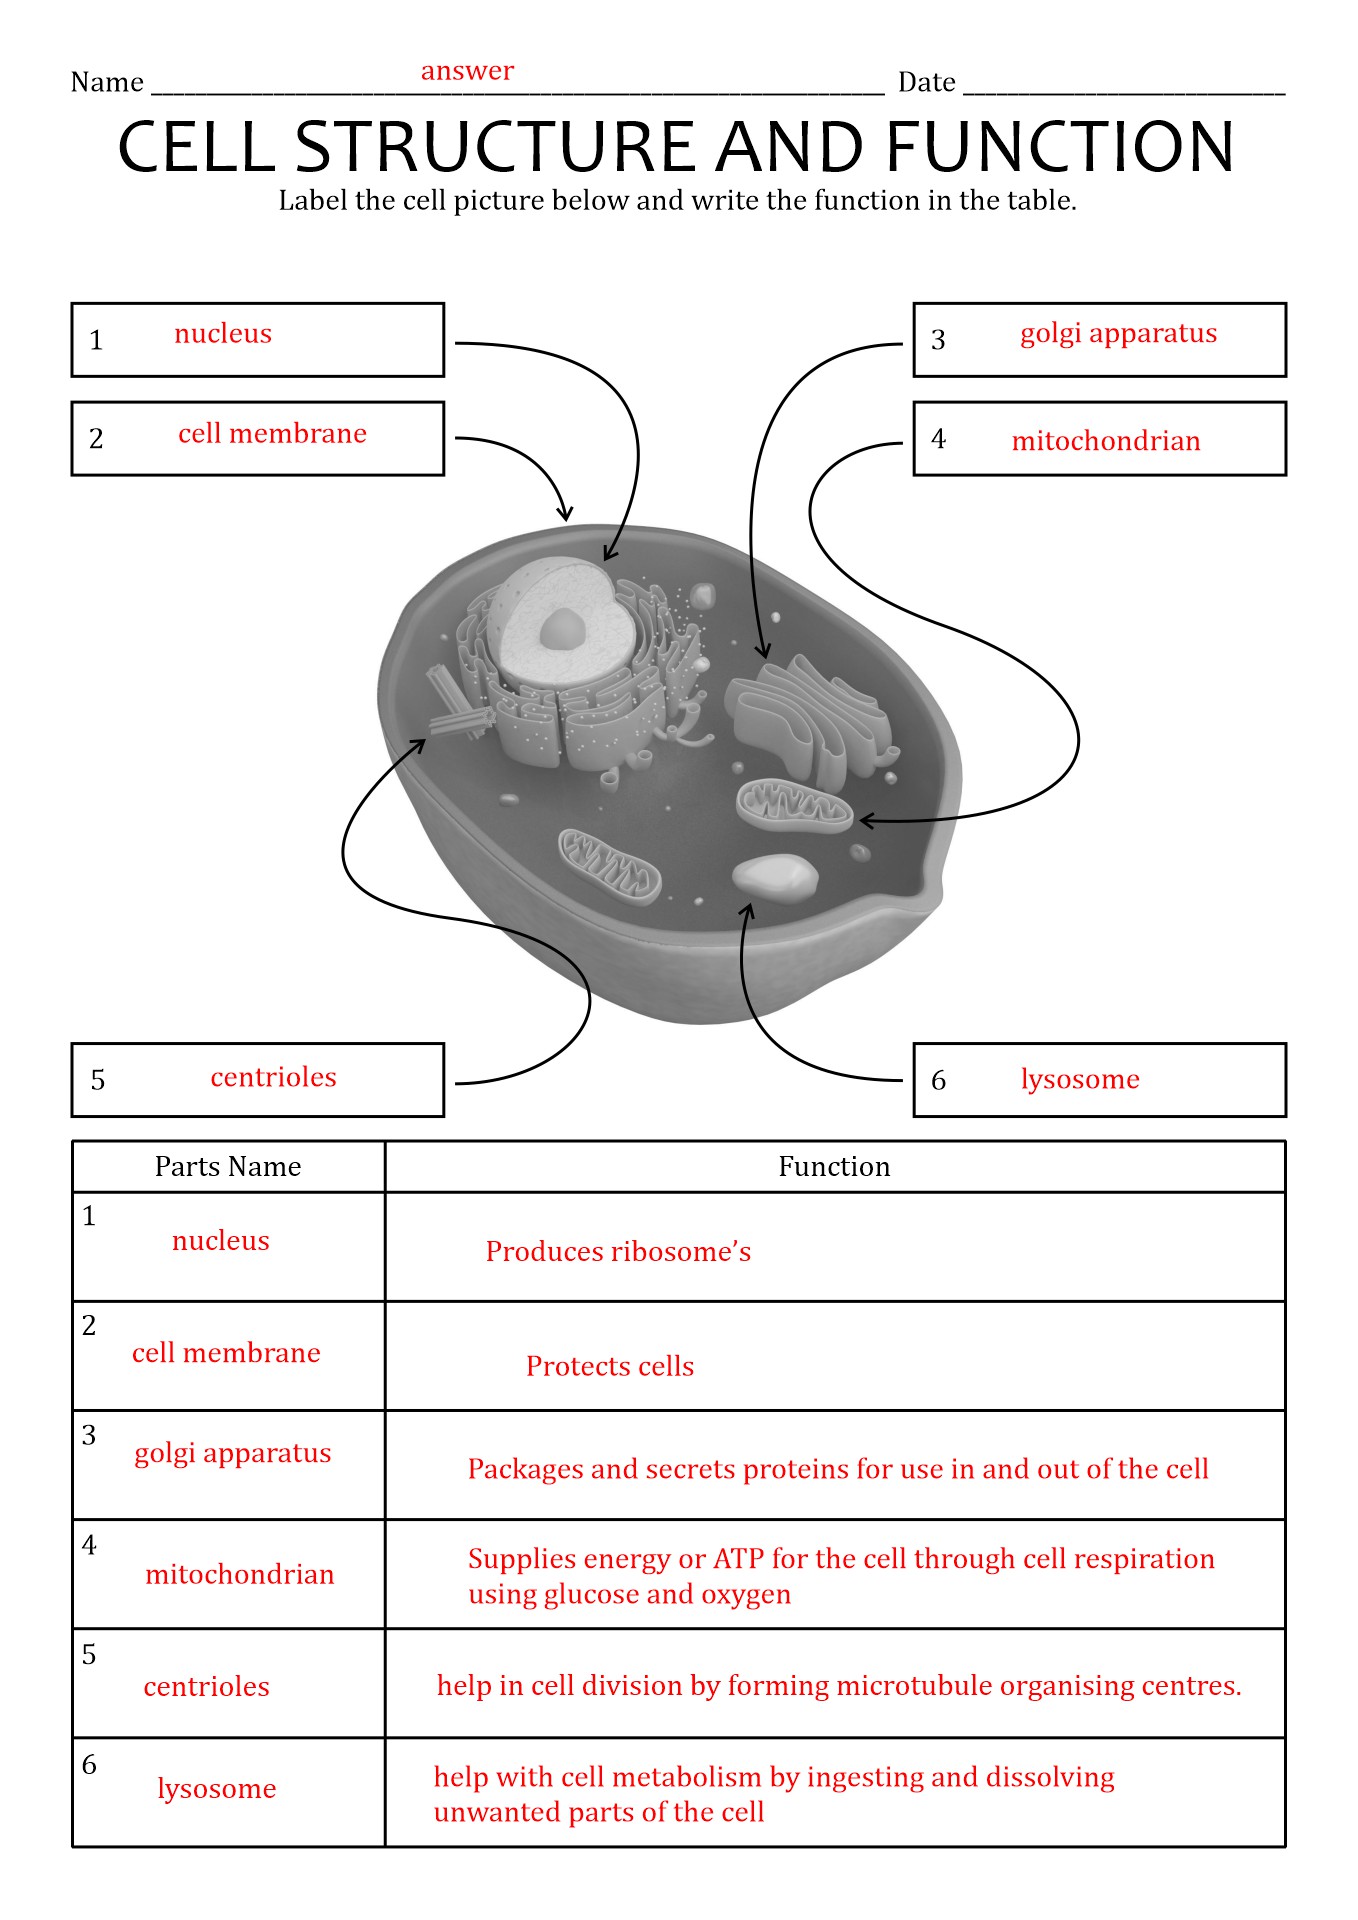 plant-cell-structure-and-function-worksheet